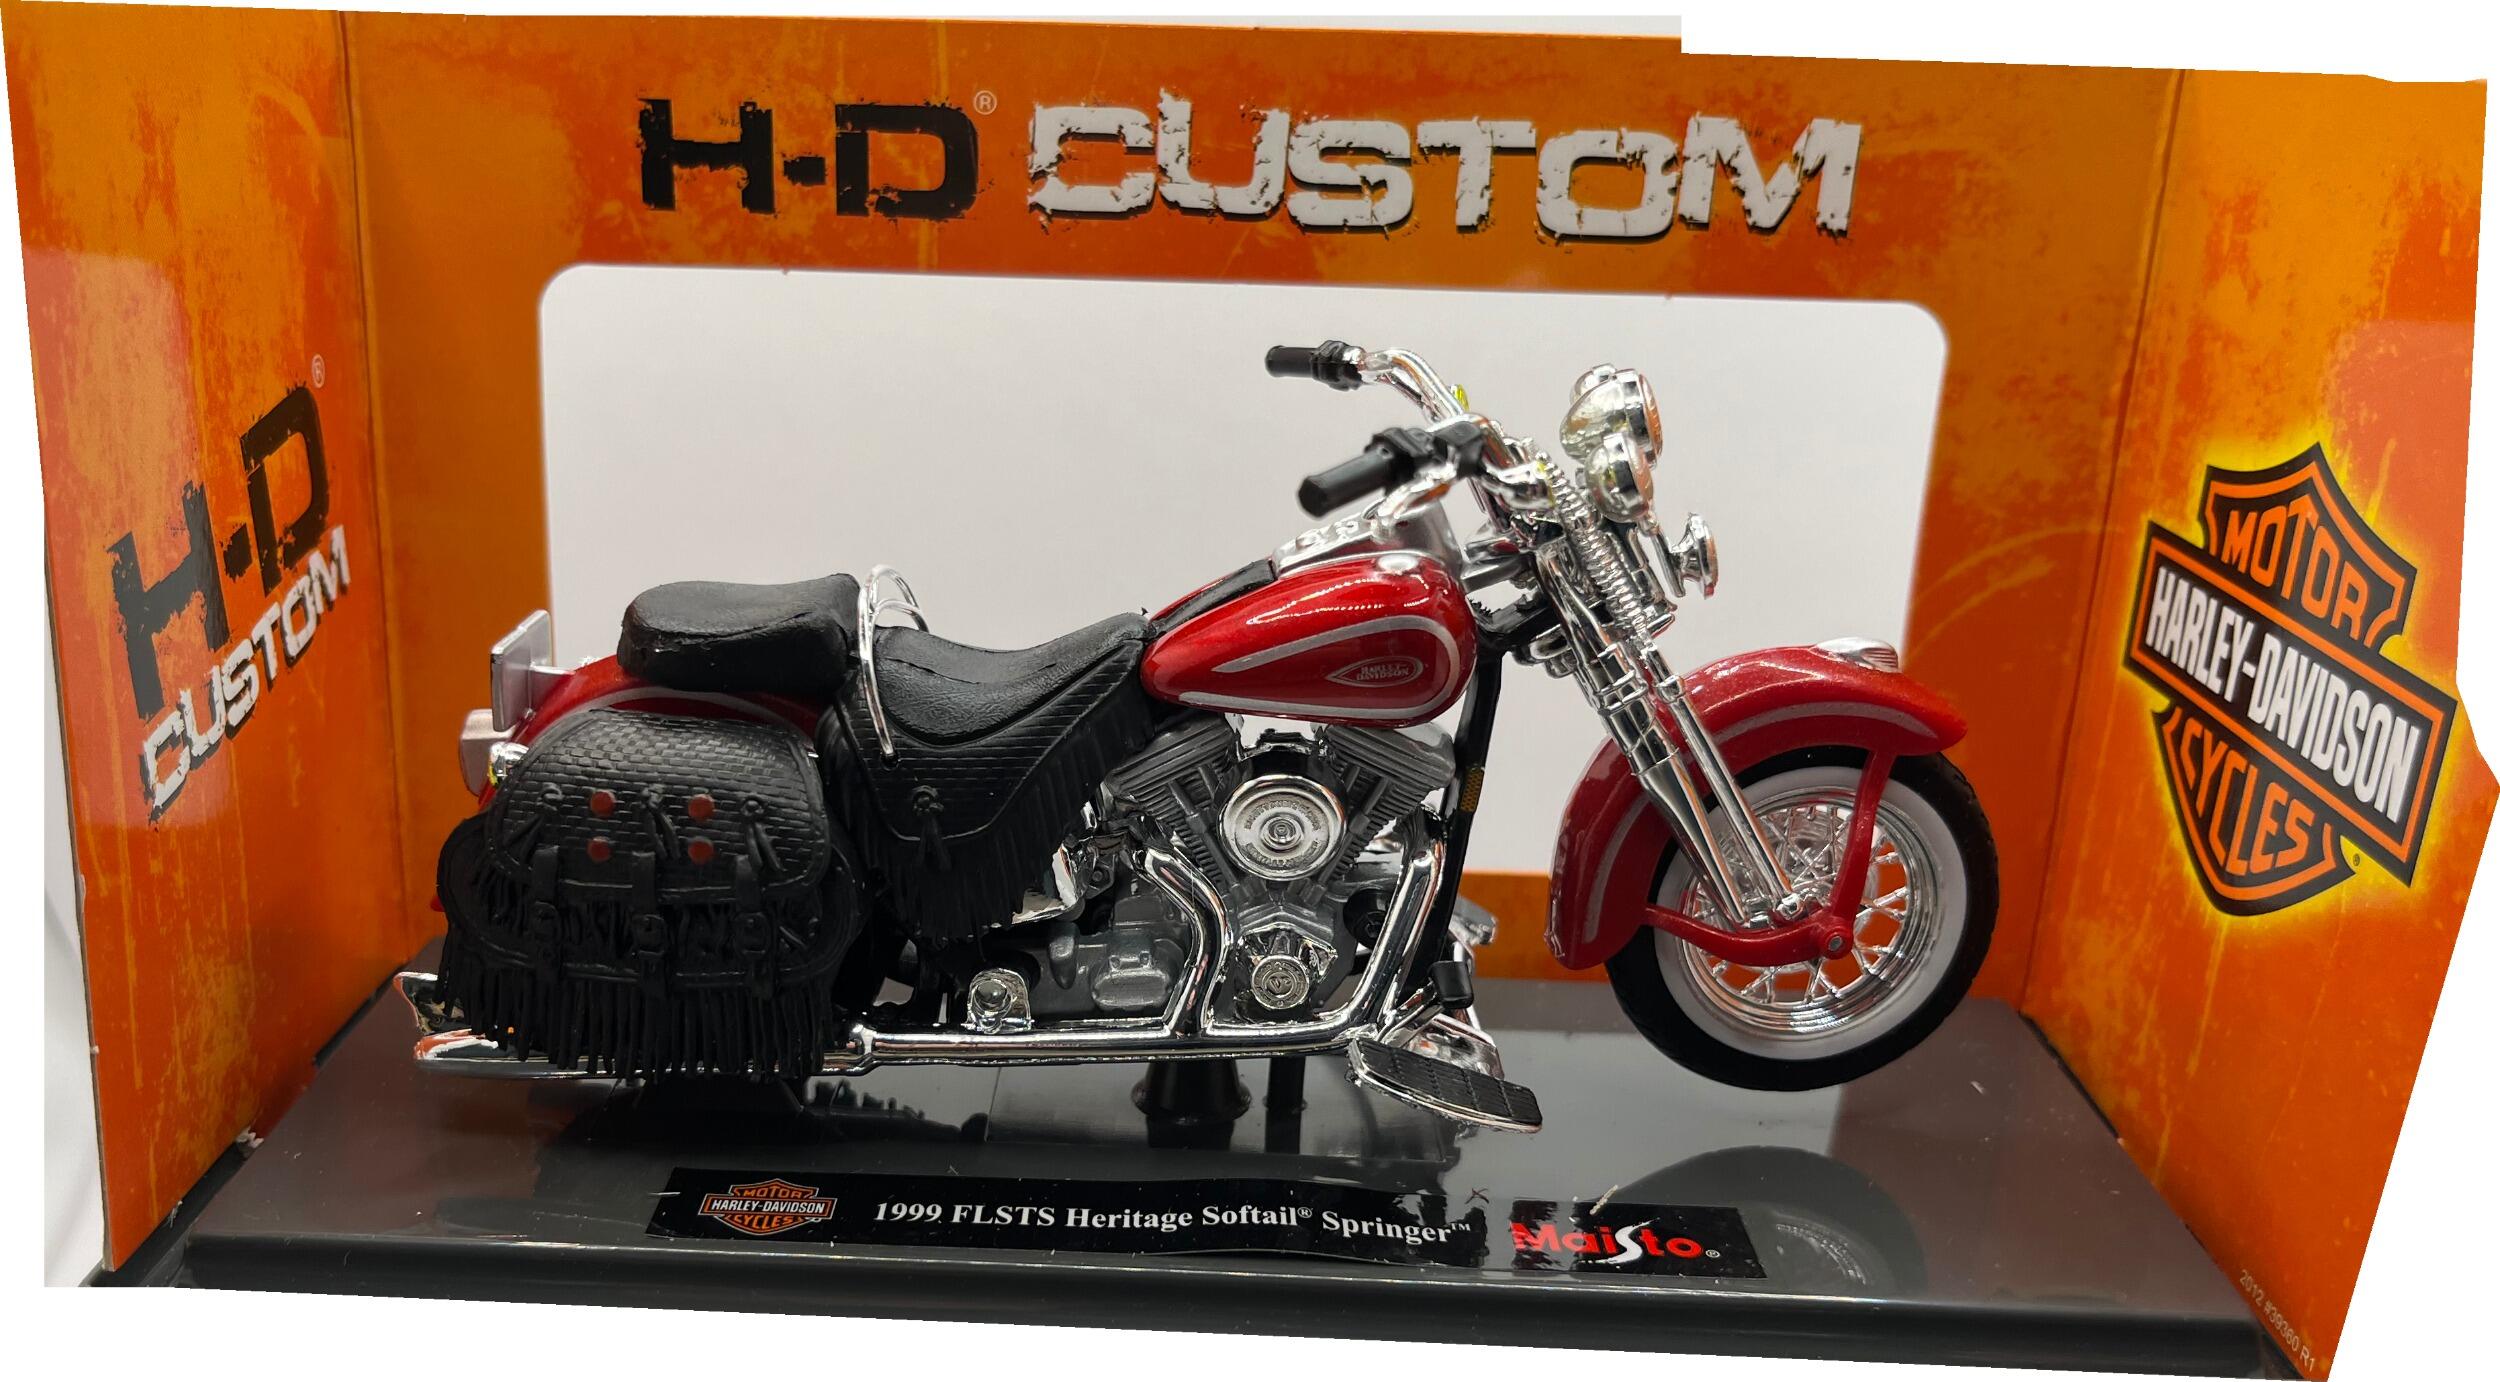 Harley Davidson FLSTS Heritage Softail Springer 1999 in red, 1:18 scale motorcycle model from Maisto